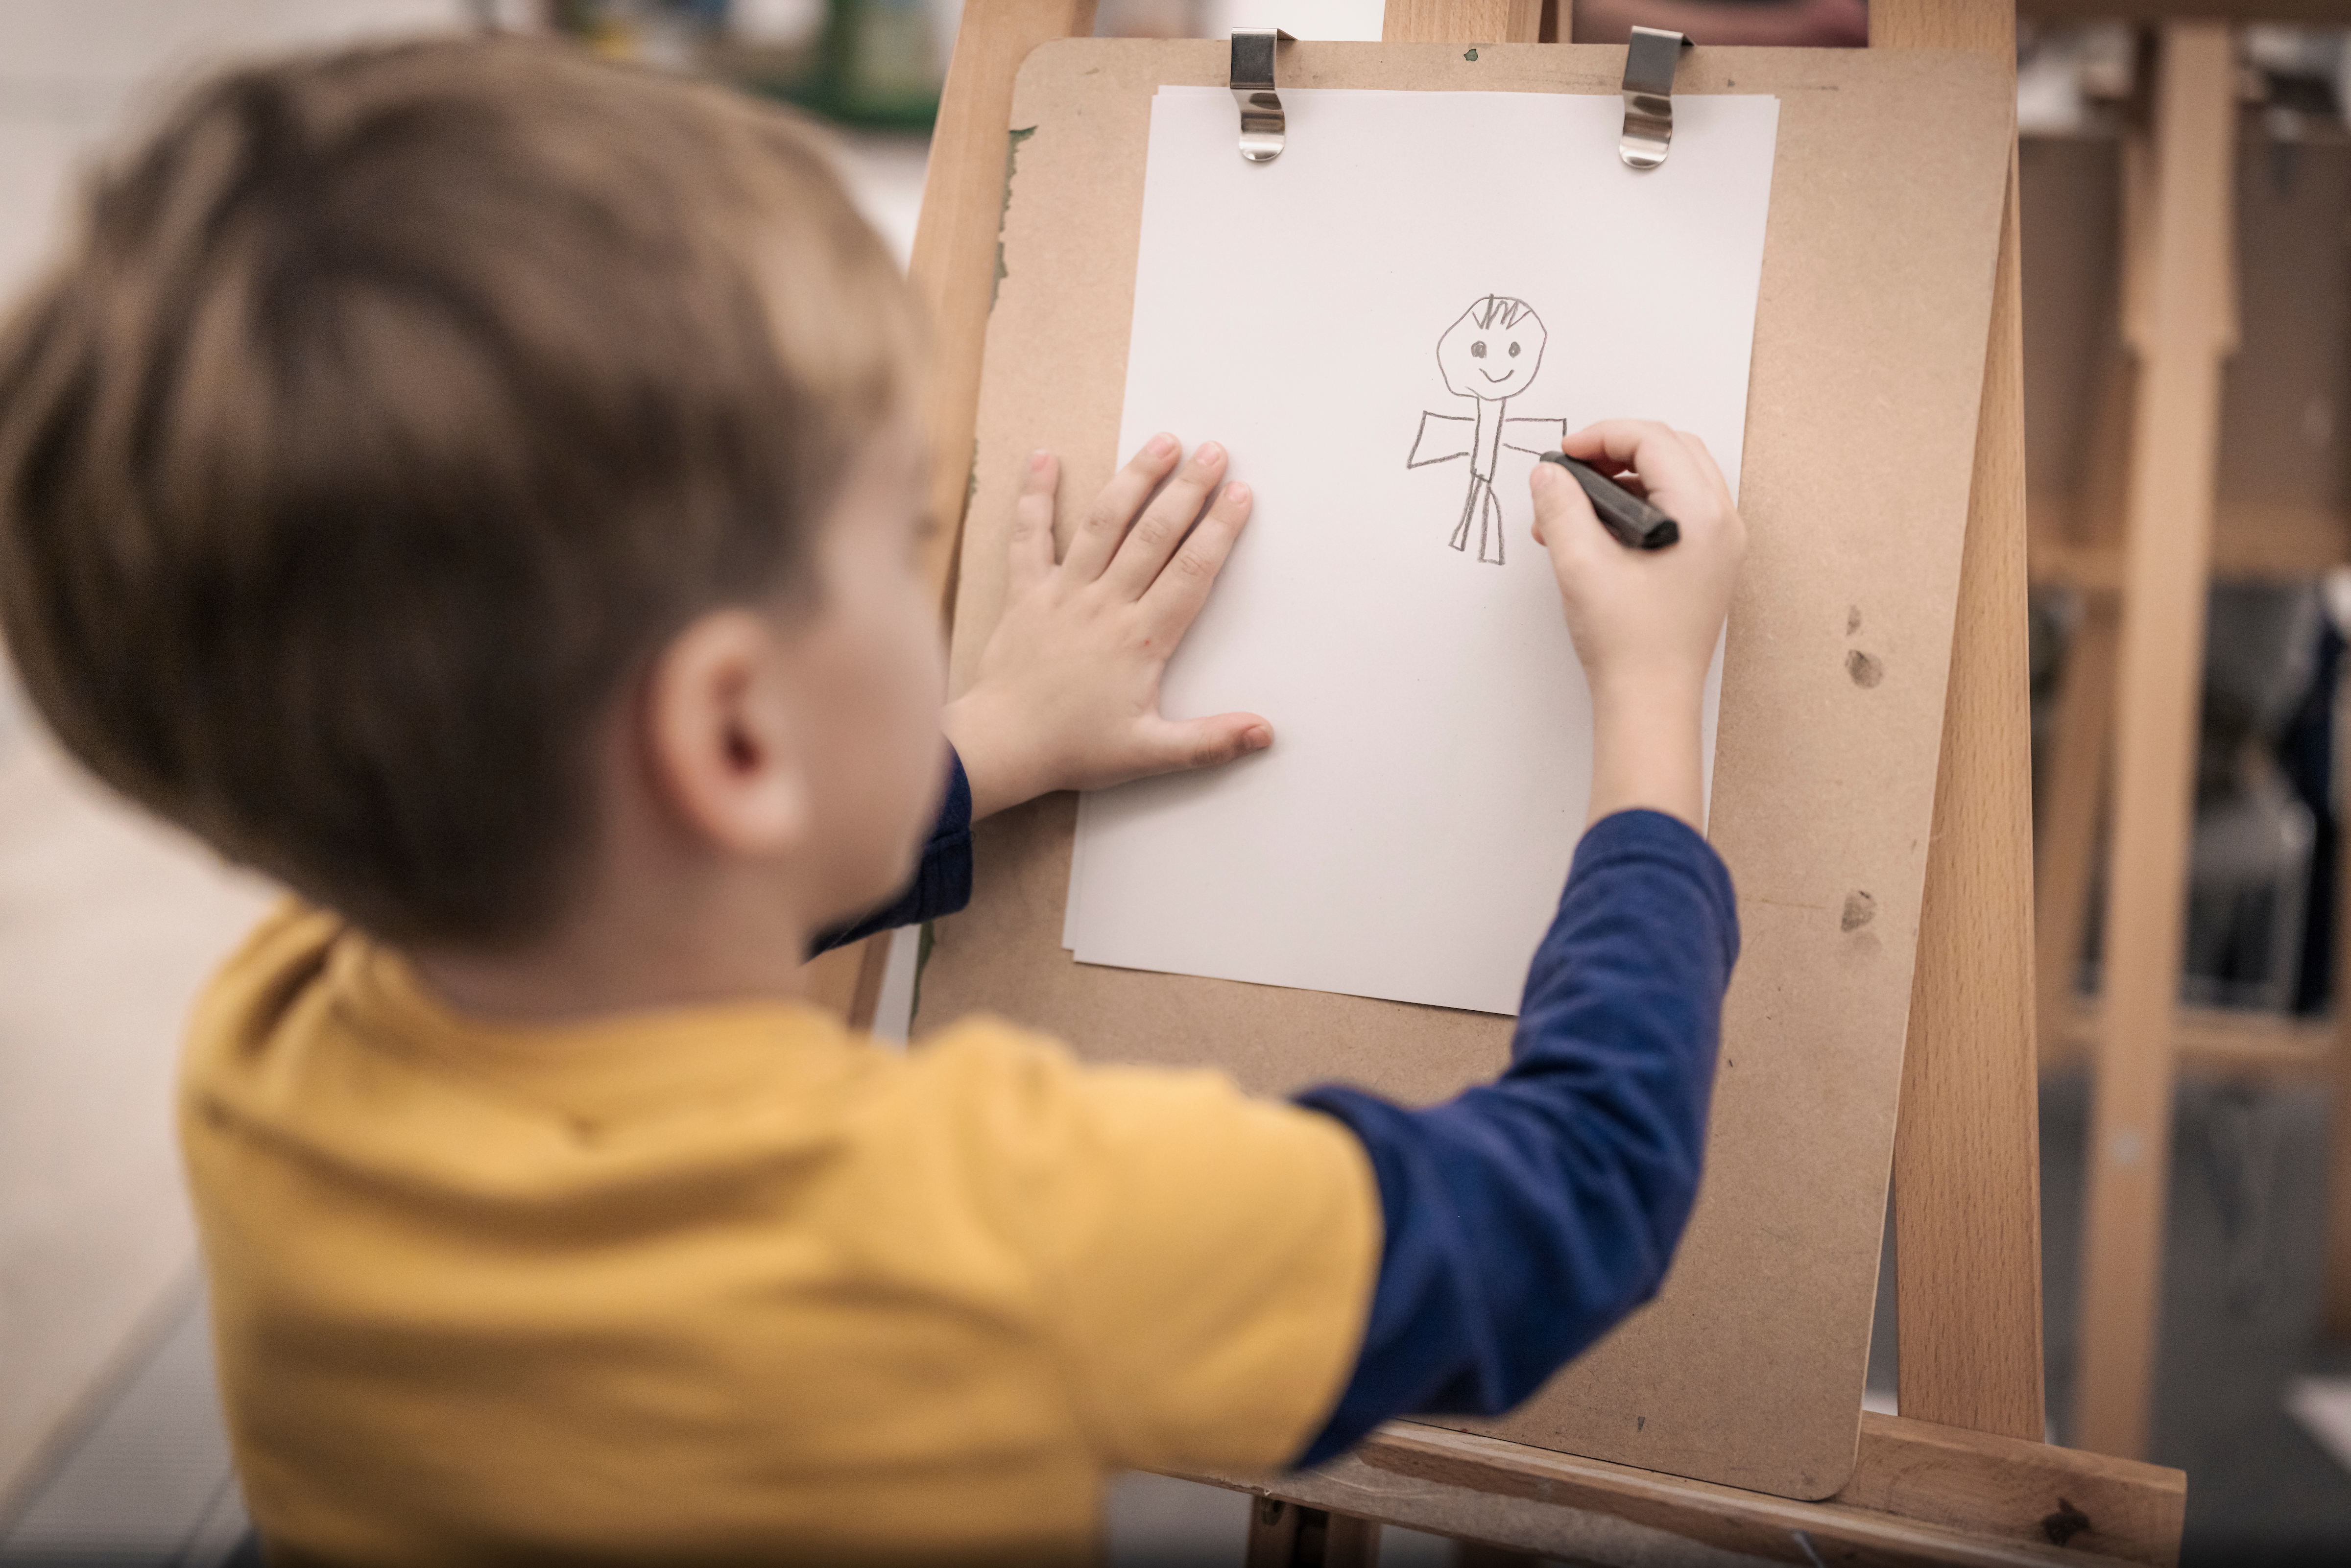 A child draws a picture of a person